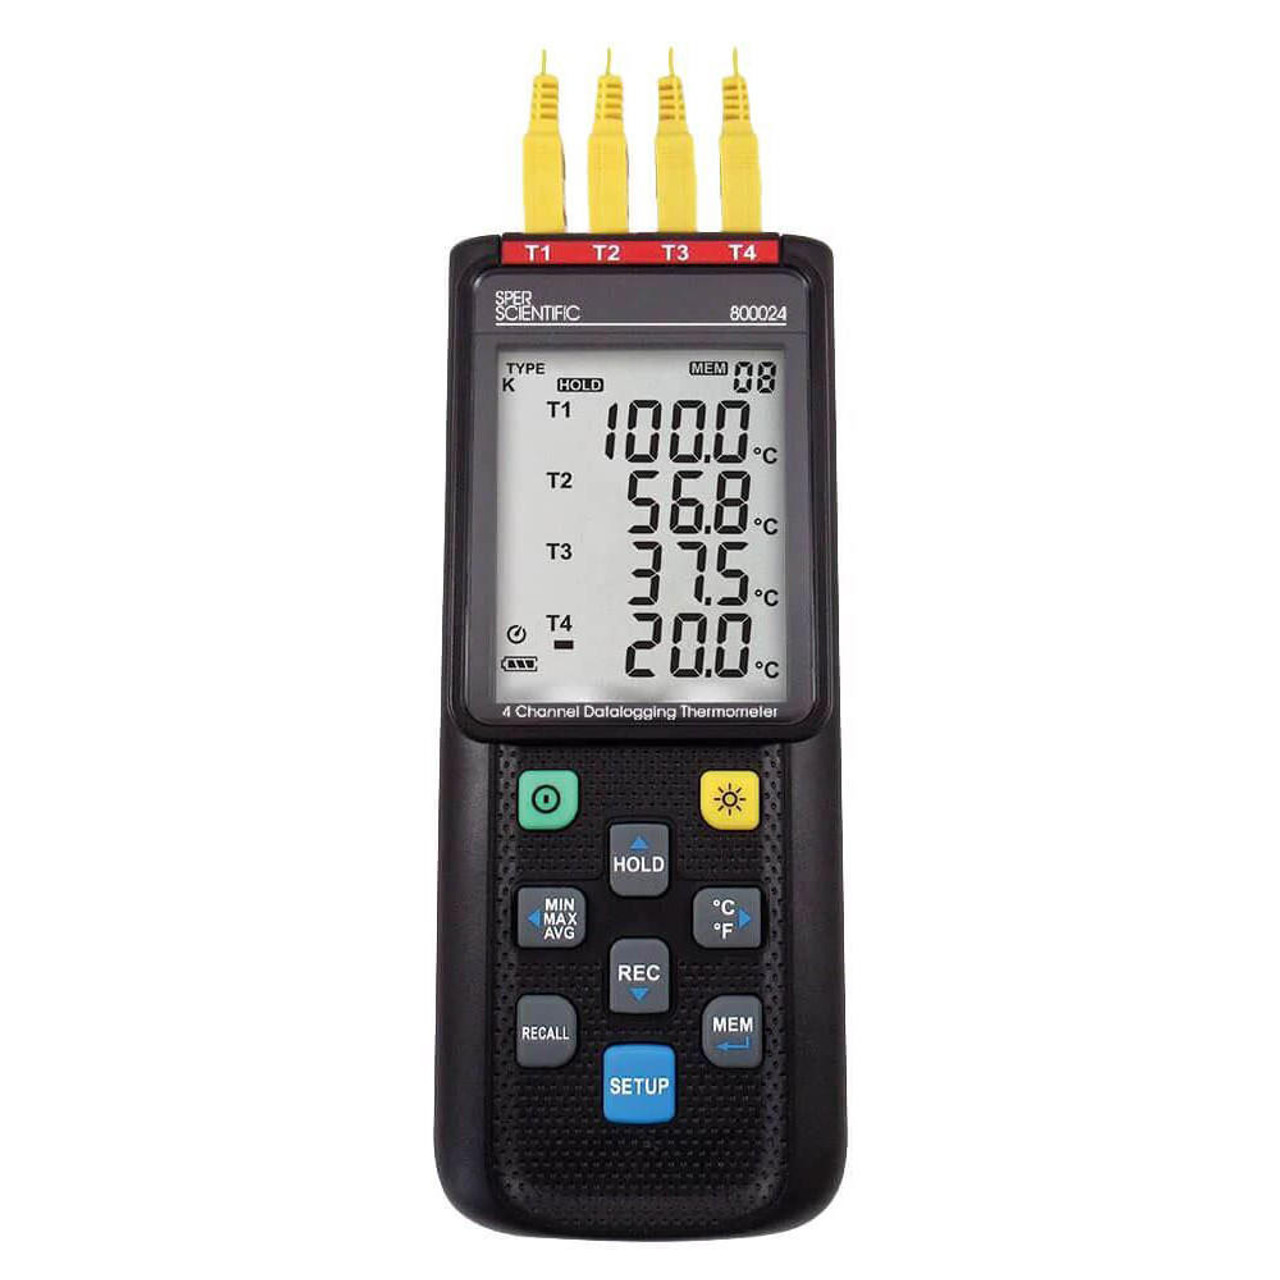 4 Channel Temperature Data Logger / Monitoring system